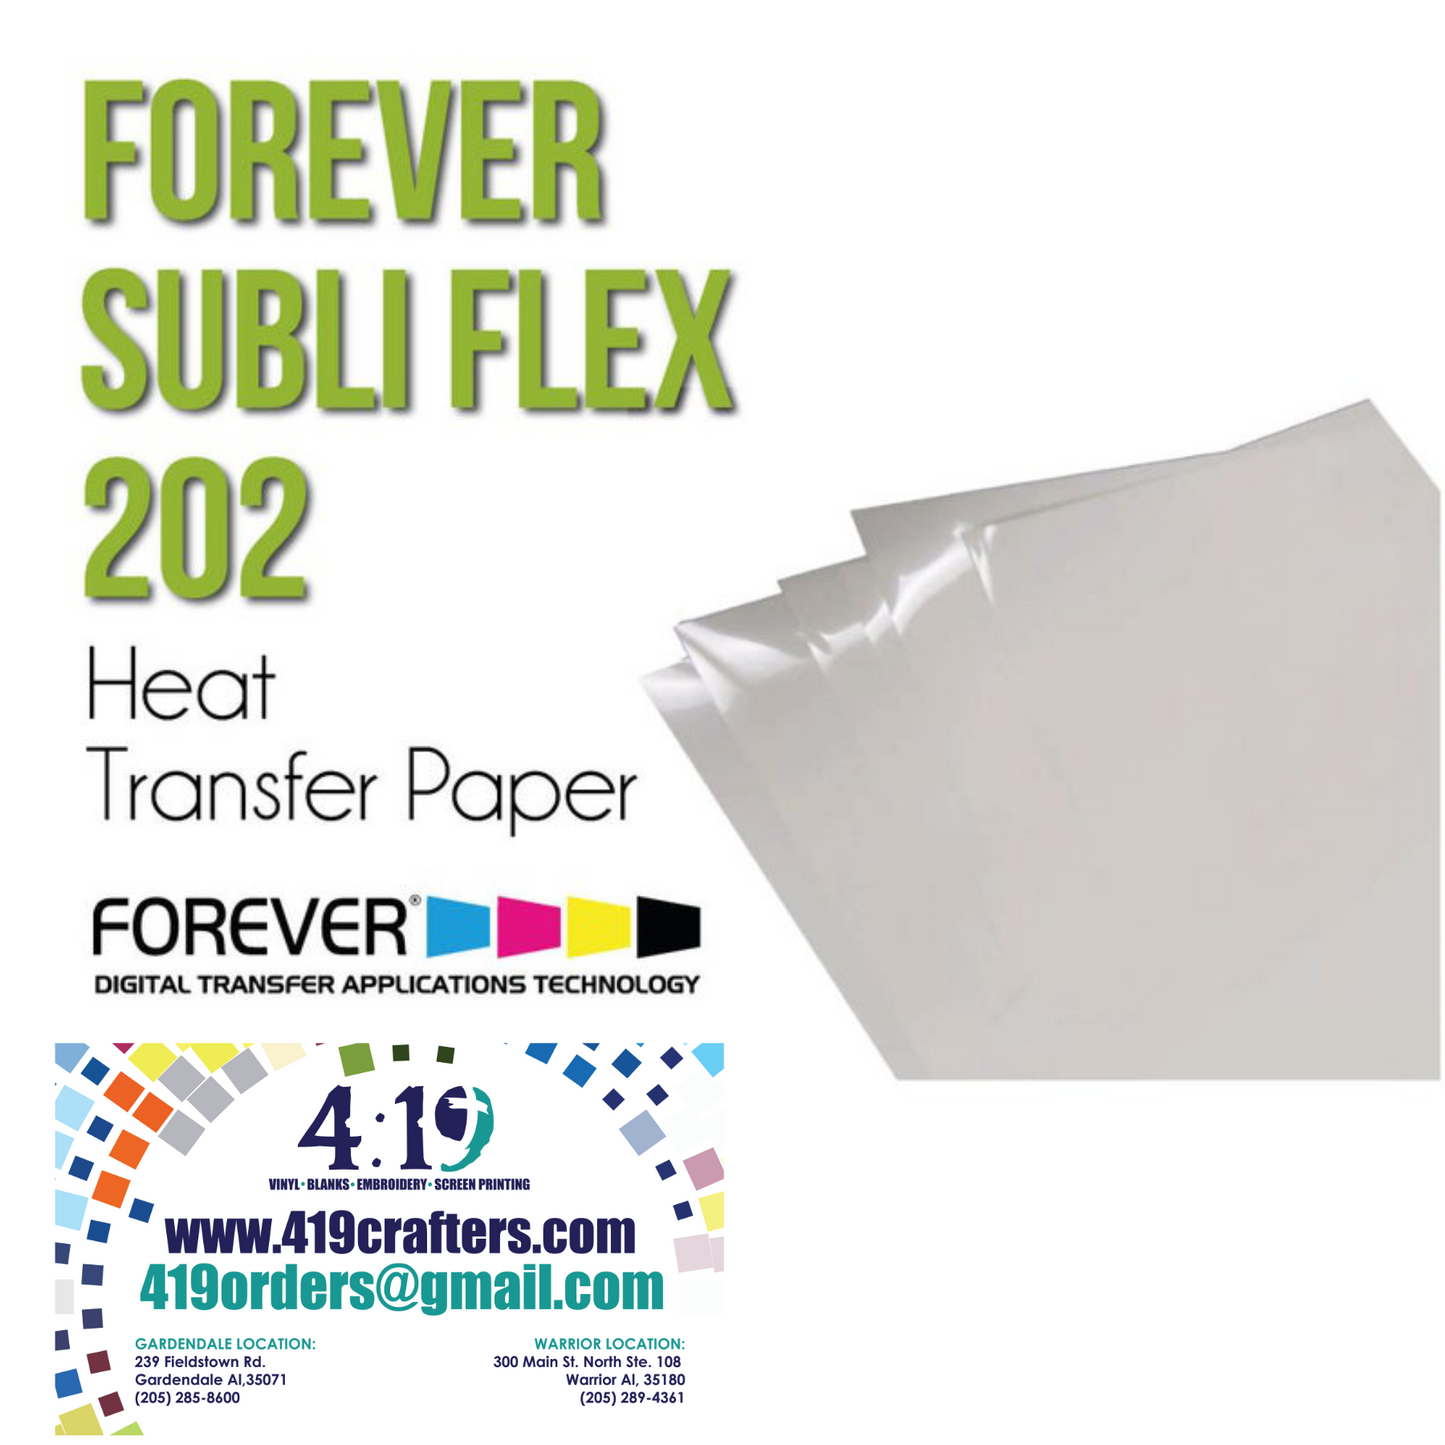 FOREVER Subli Flex 202 Sublimation Paper for Dark and Cotton Garments